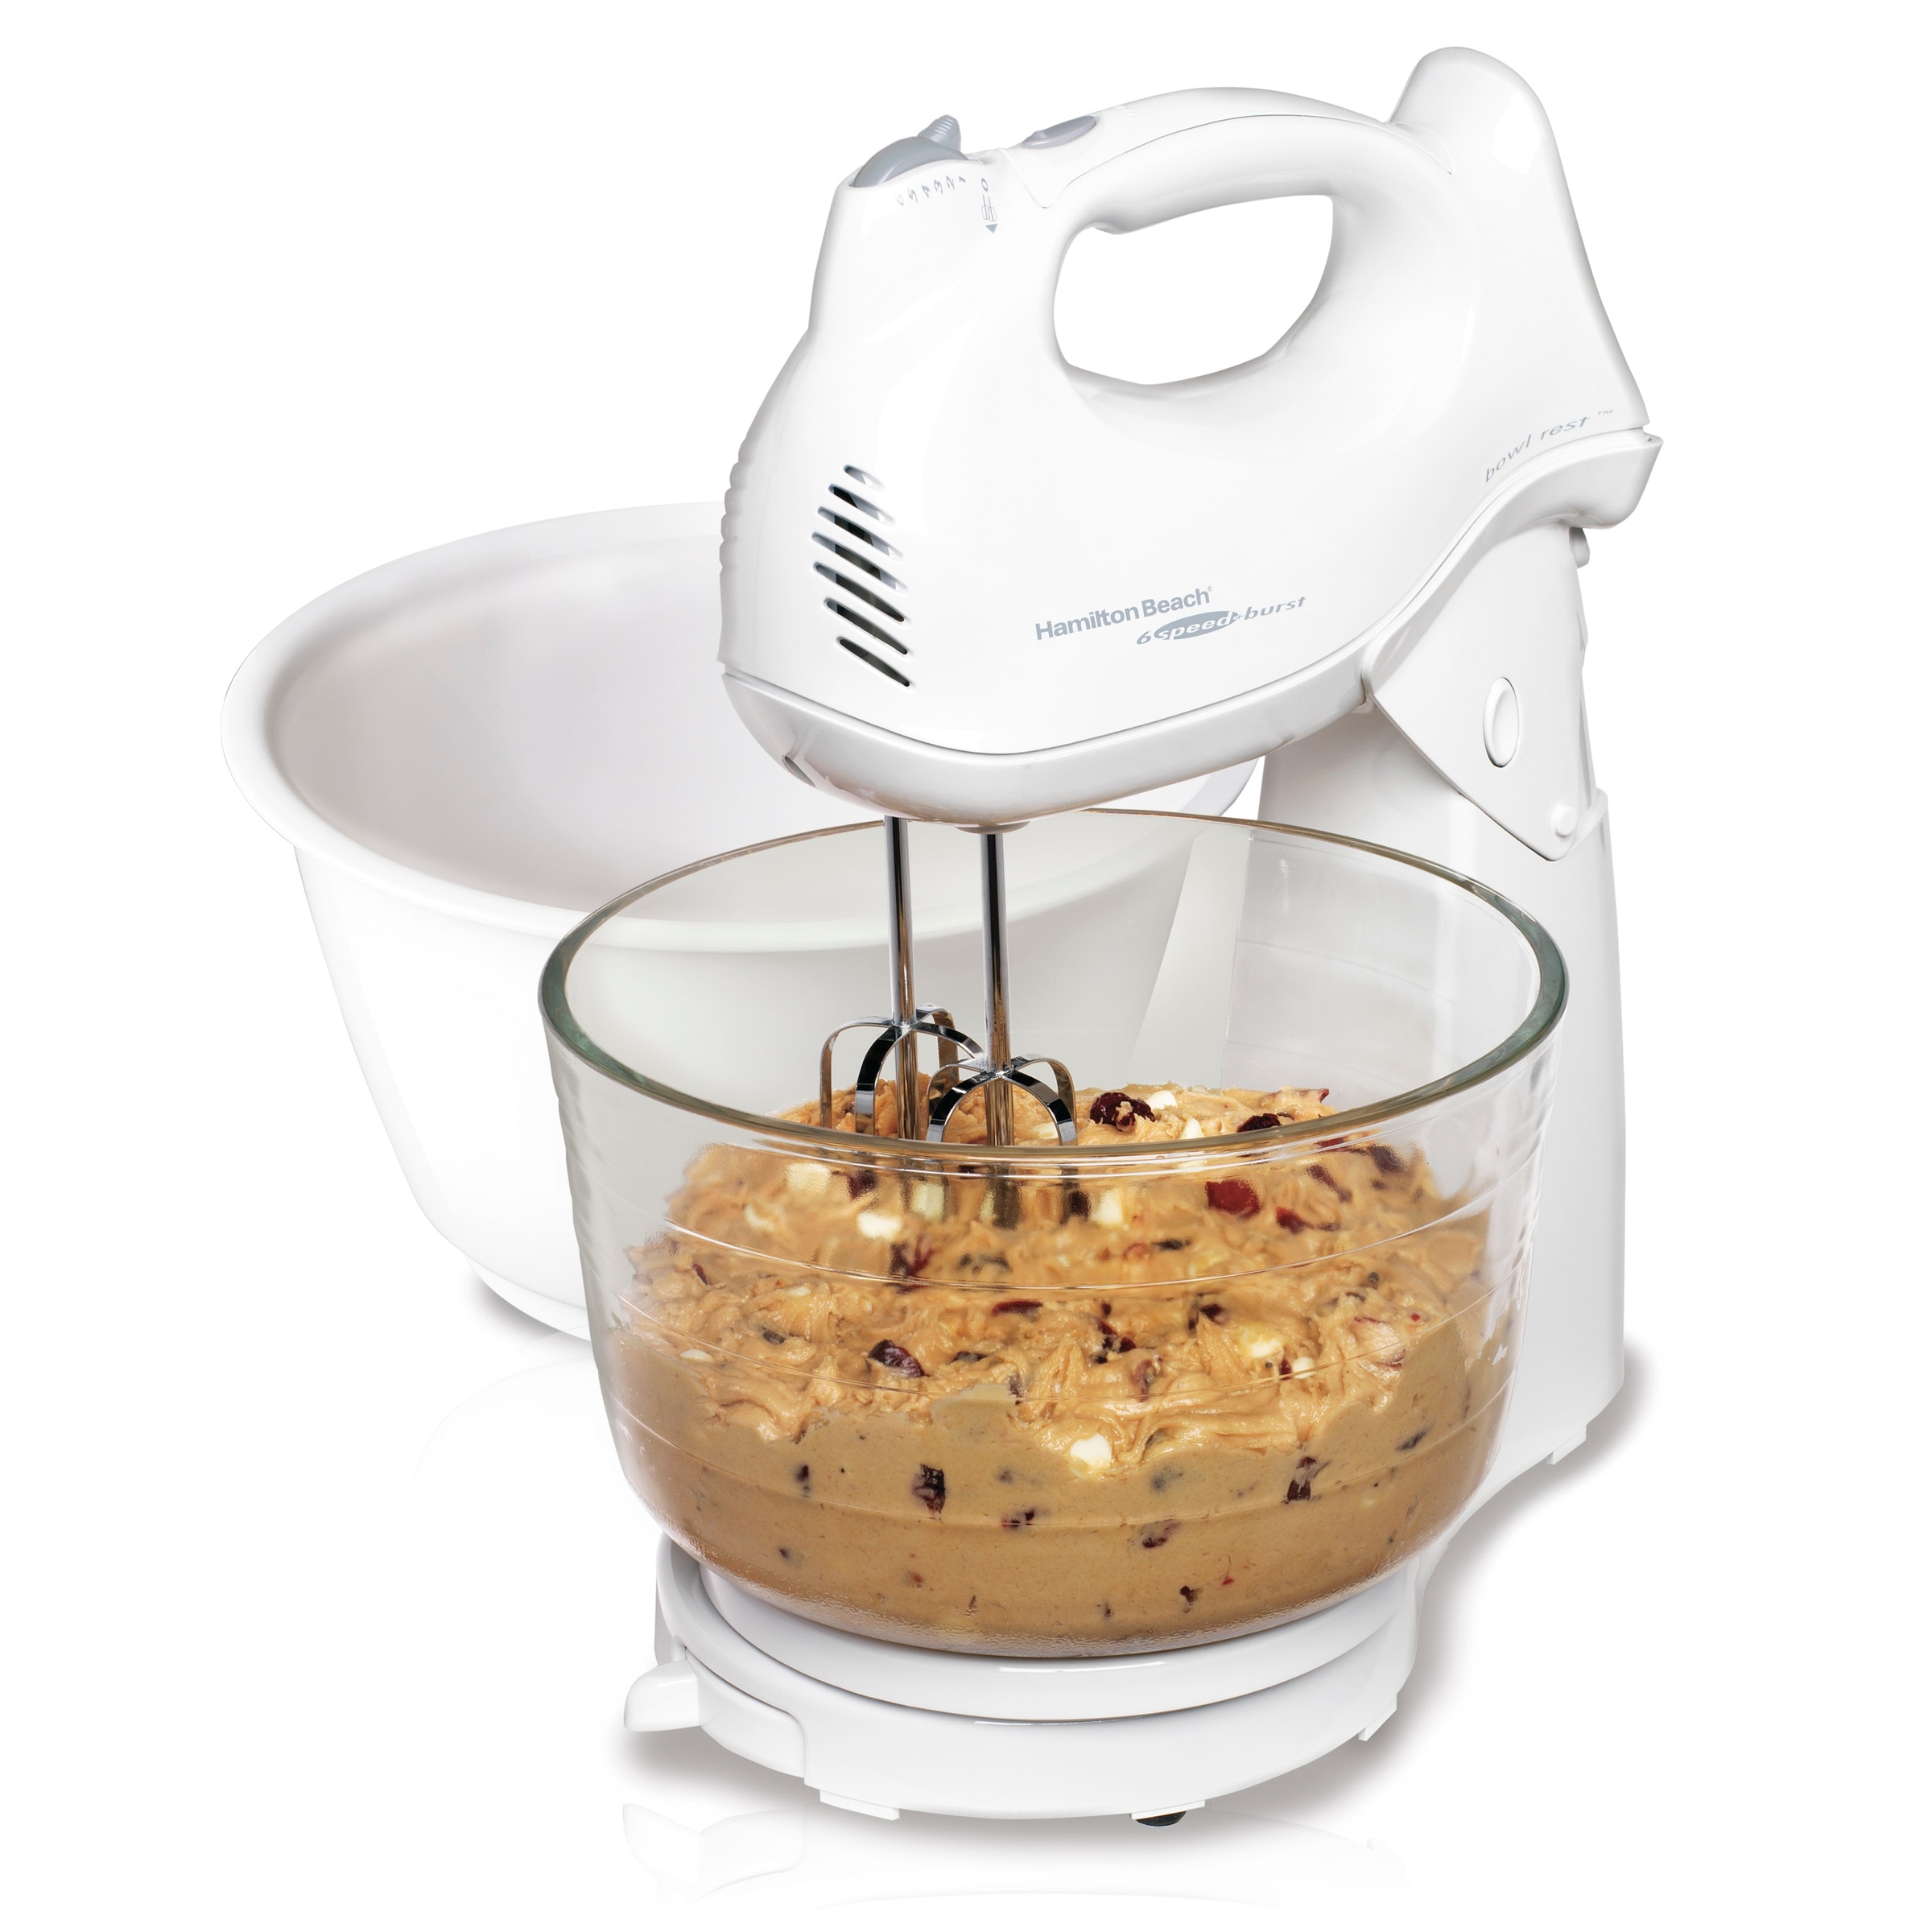 Hamilton Beach 6-Speed Stand Mixer Review: Basic but Solid